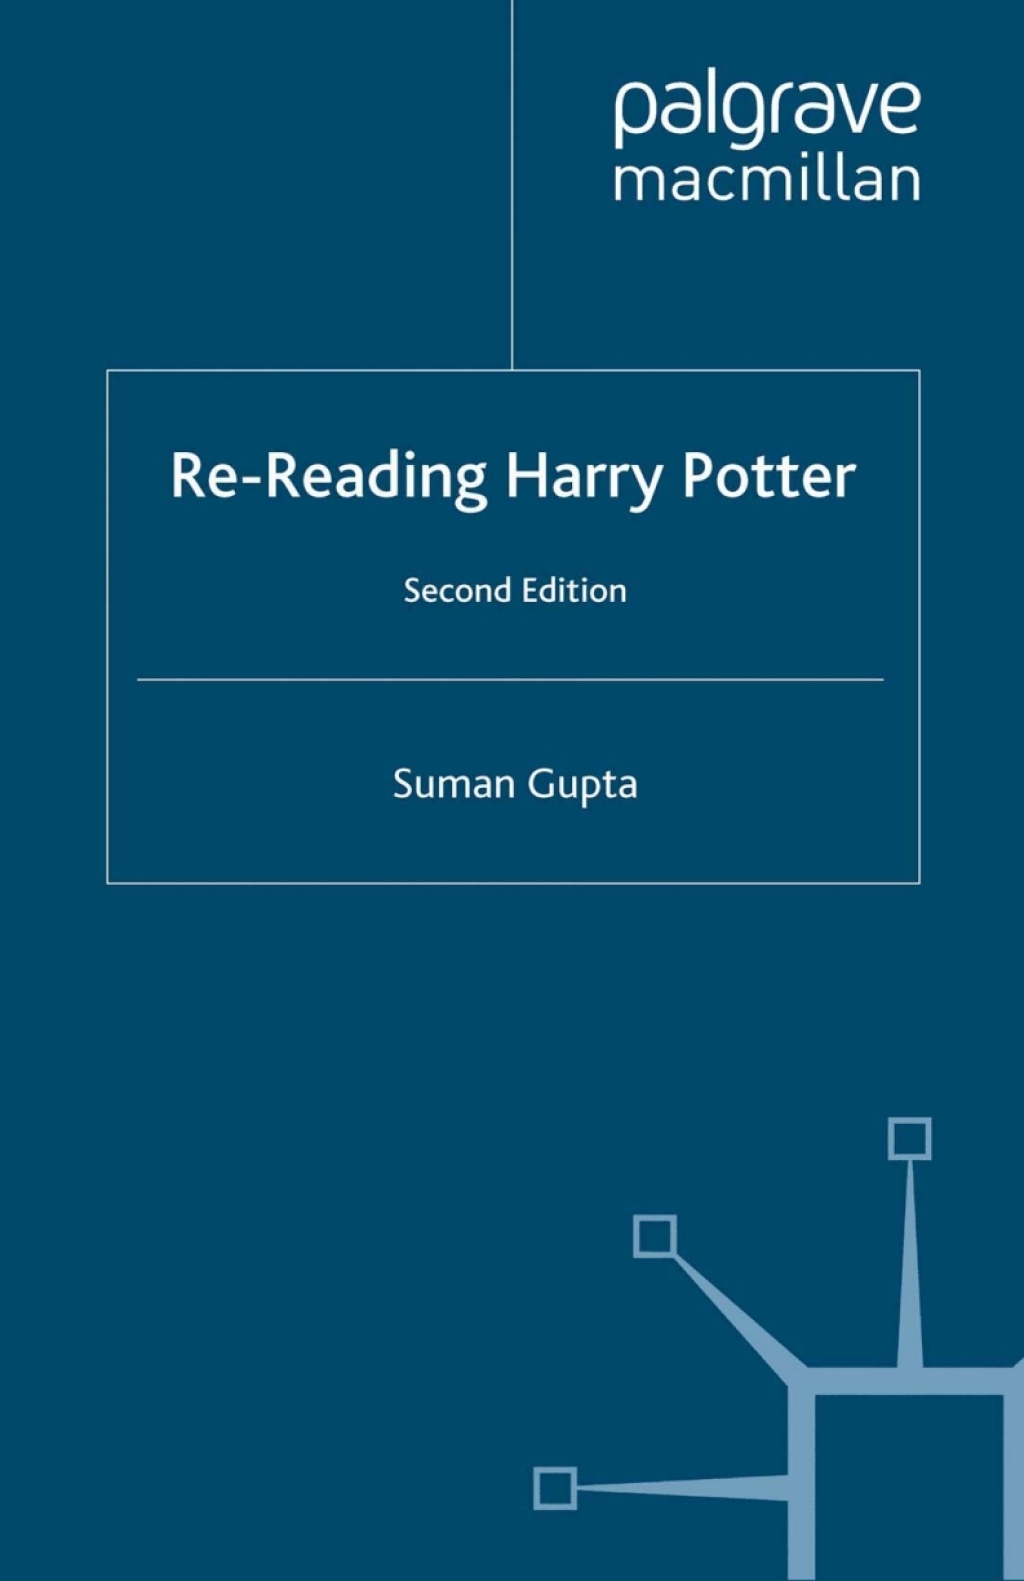 Re-Reading Harry Potter - 2nd Edition (eBook Rental)